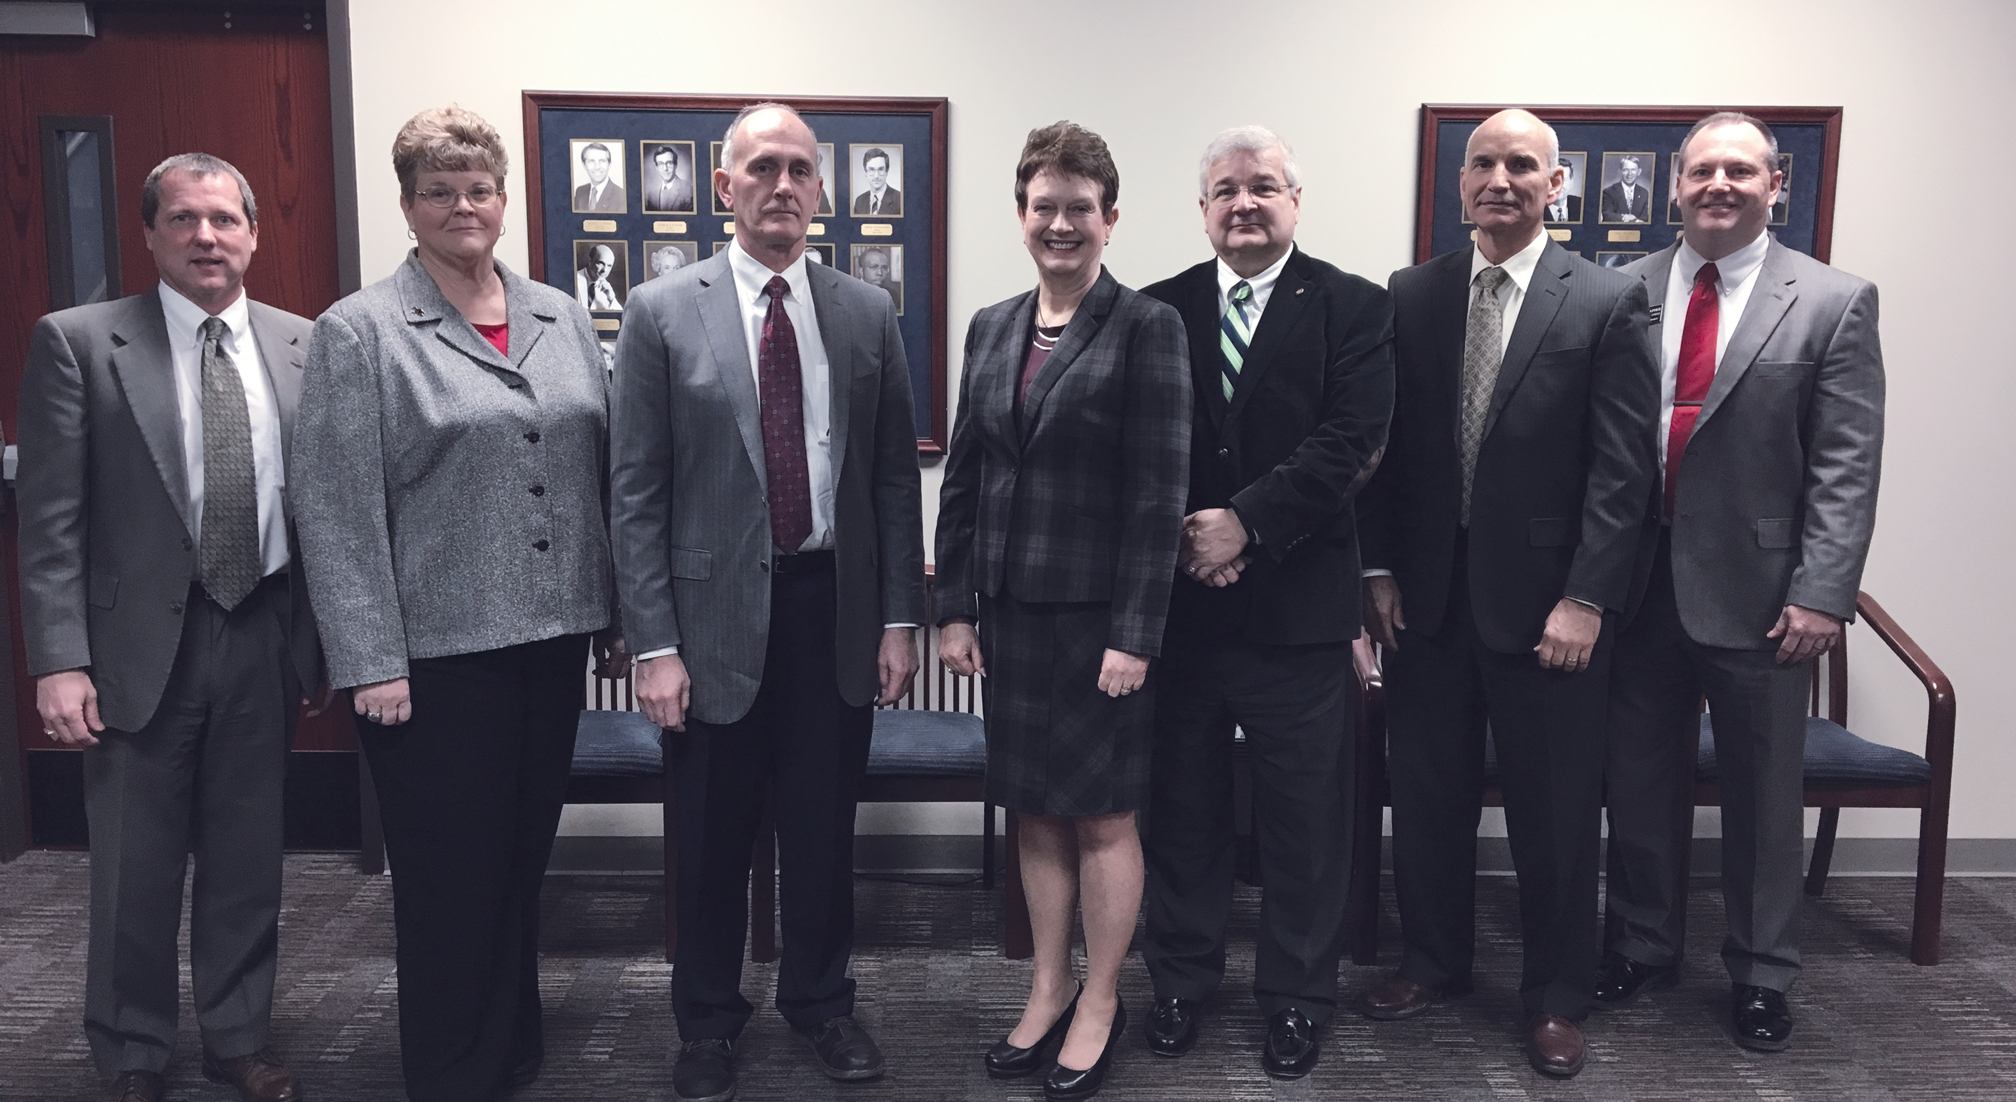 (from left to right) Dr. David Pecha, vice president for administration; Dr. Shelly Wells, Division of Nursing chair; Todd Holder, Charles Morton Share Trust representative; Dr. Janet Cunningham, Northwestern president; B. Michael Carroll, Charles Morton Share Trust representative; Dr. Steve Lohmann, executive vice president; and Dr. Bo Hannaford, dean of the School of Professional Studies.